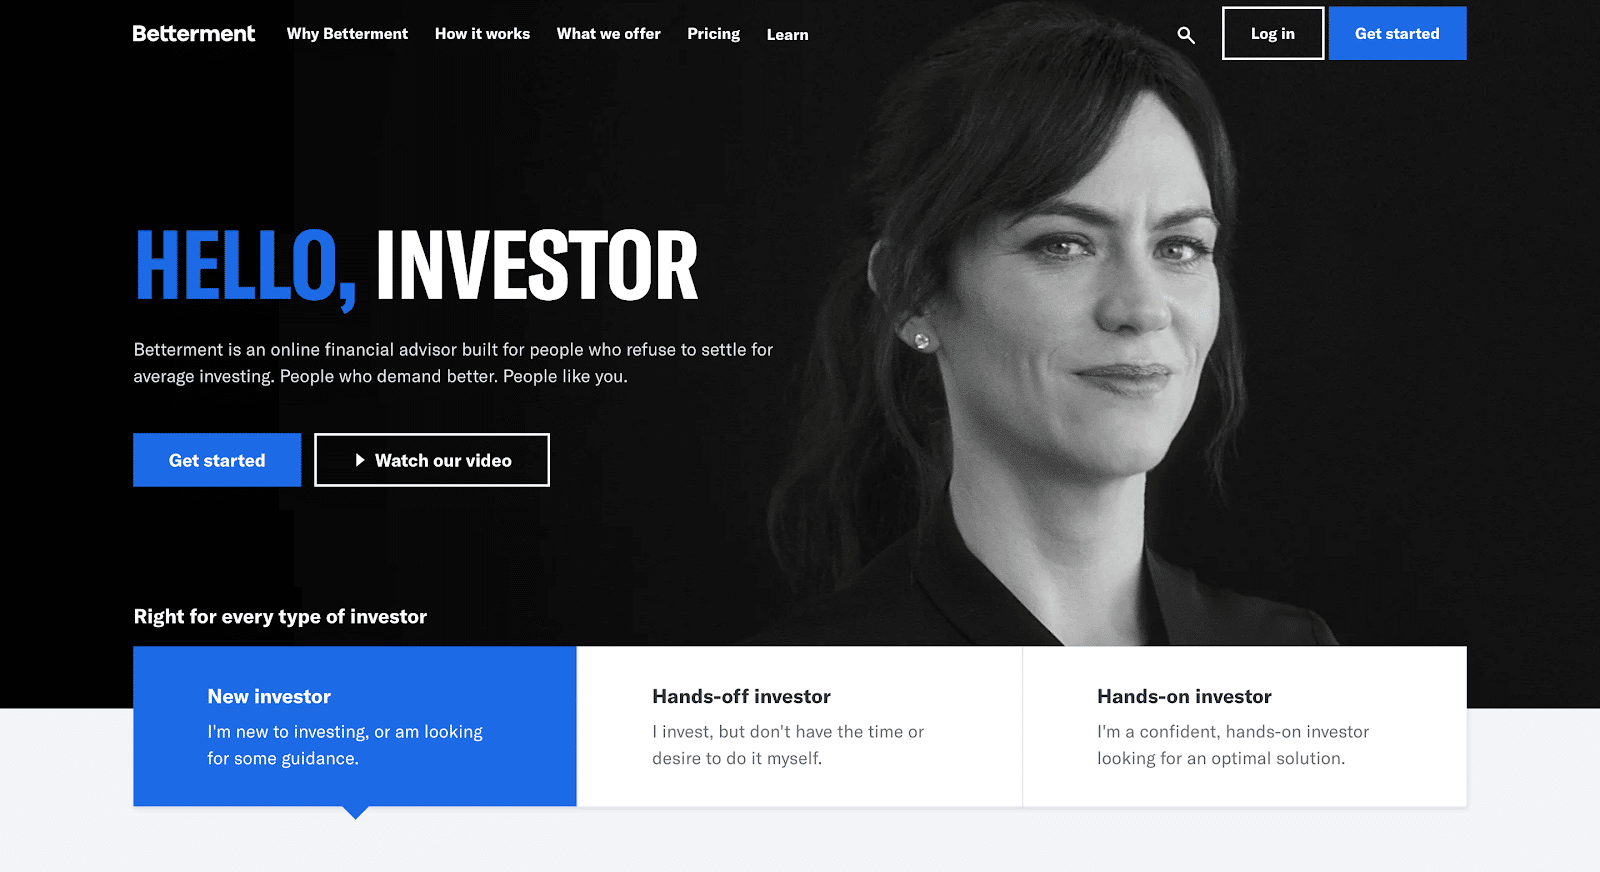 How to invest money: the Betterment webpage